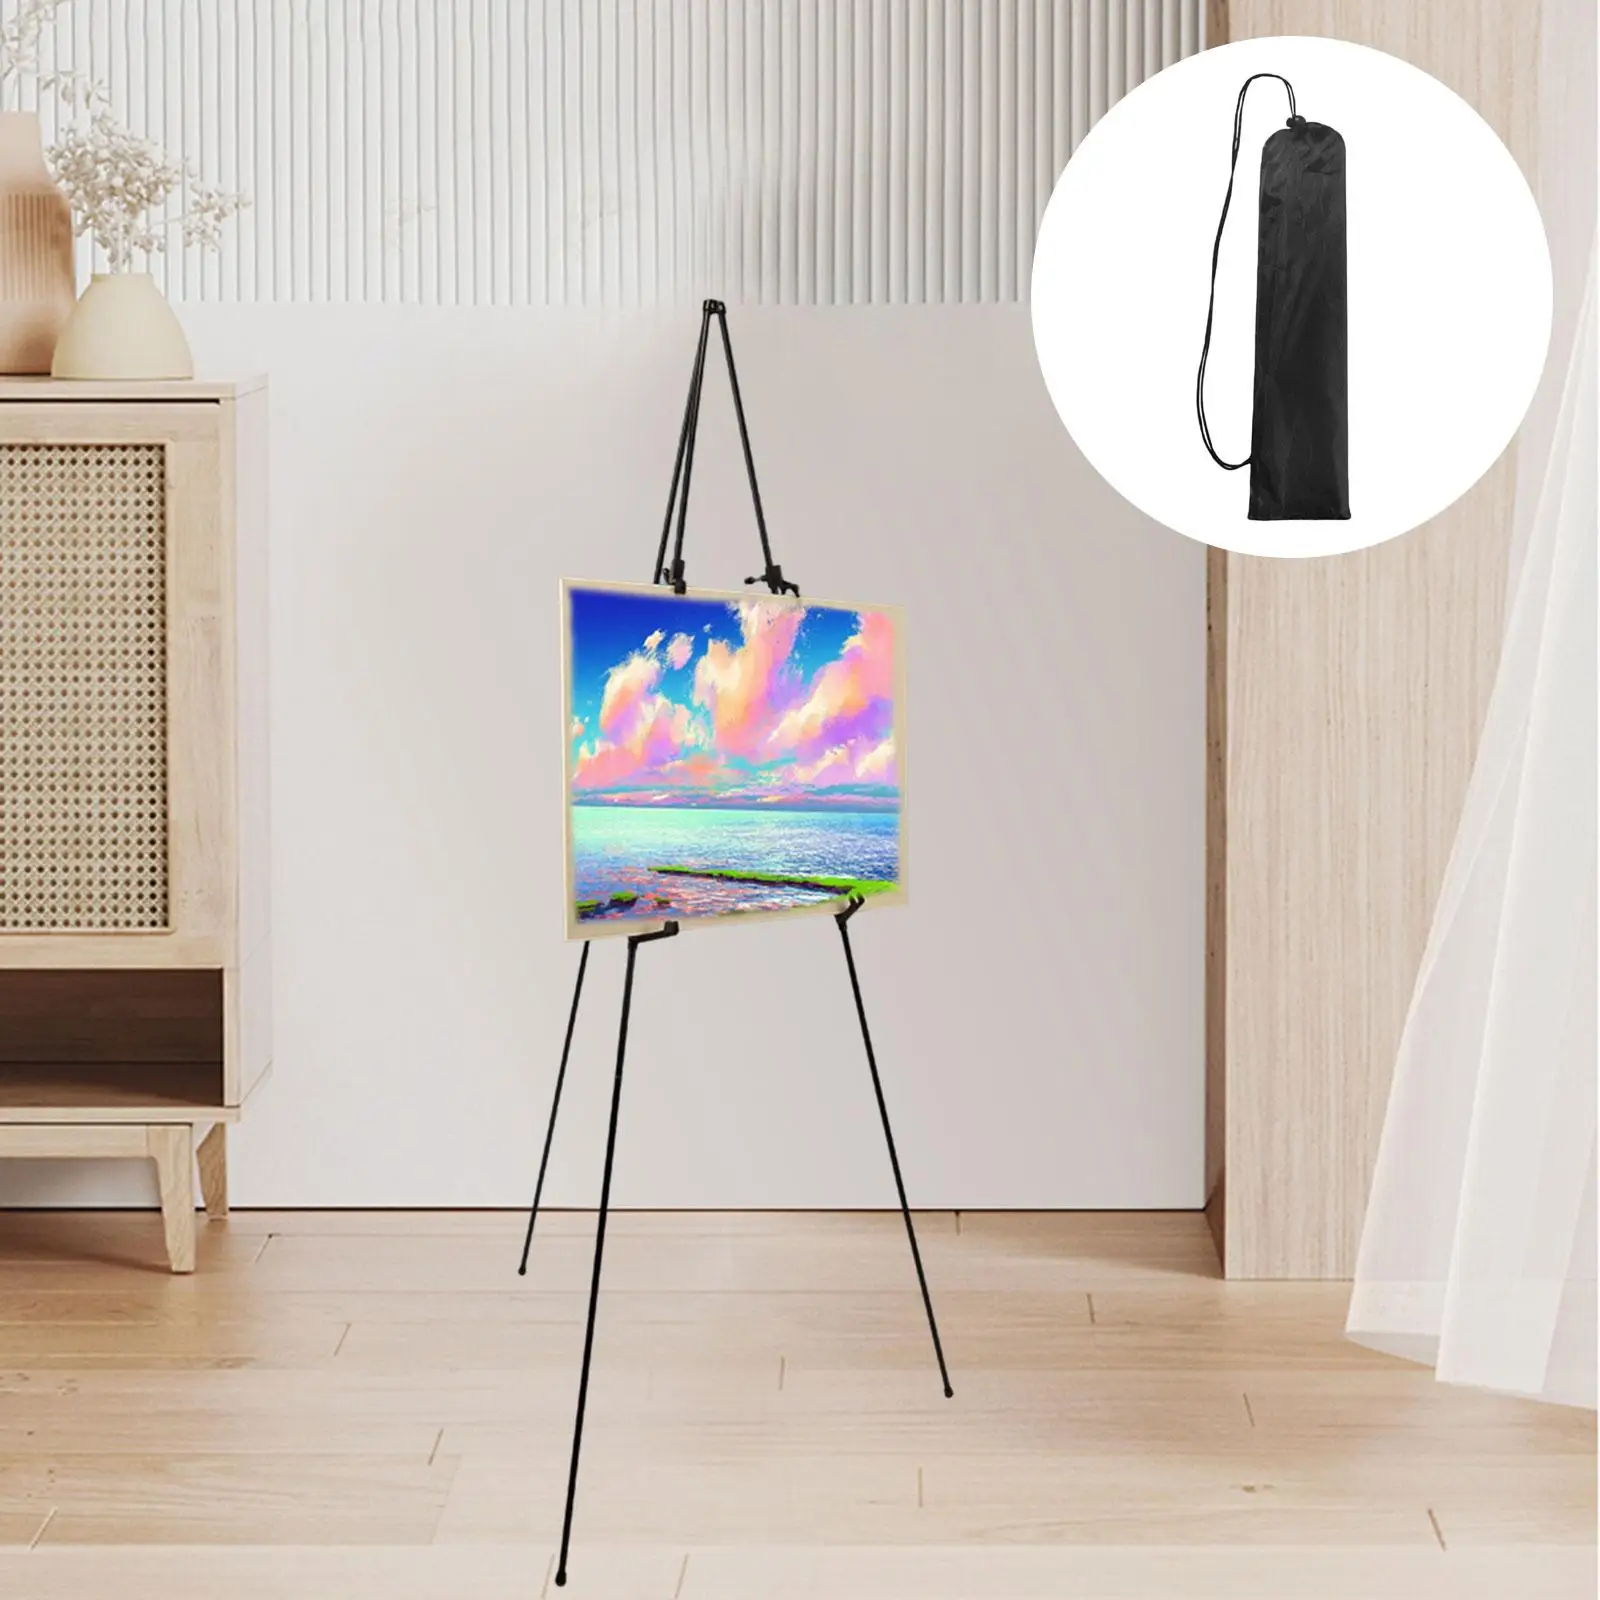 Tripod Display Easel Stand Holder Table Top Easels Metal Easel Collapsible Artist Easel for Wood Board Photo Frame Picture